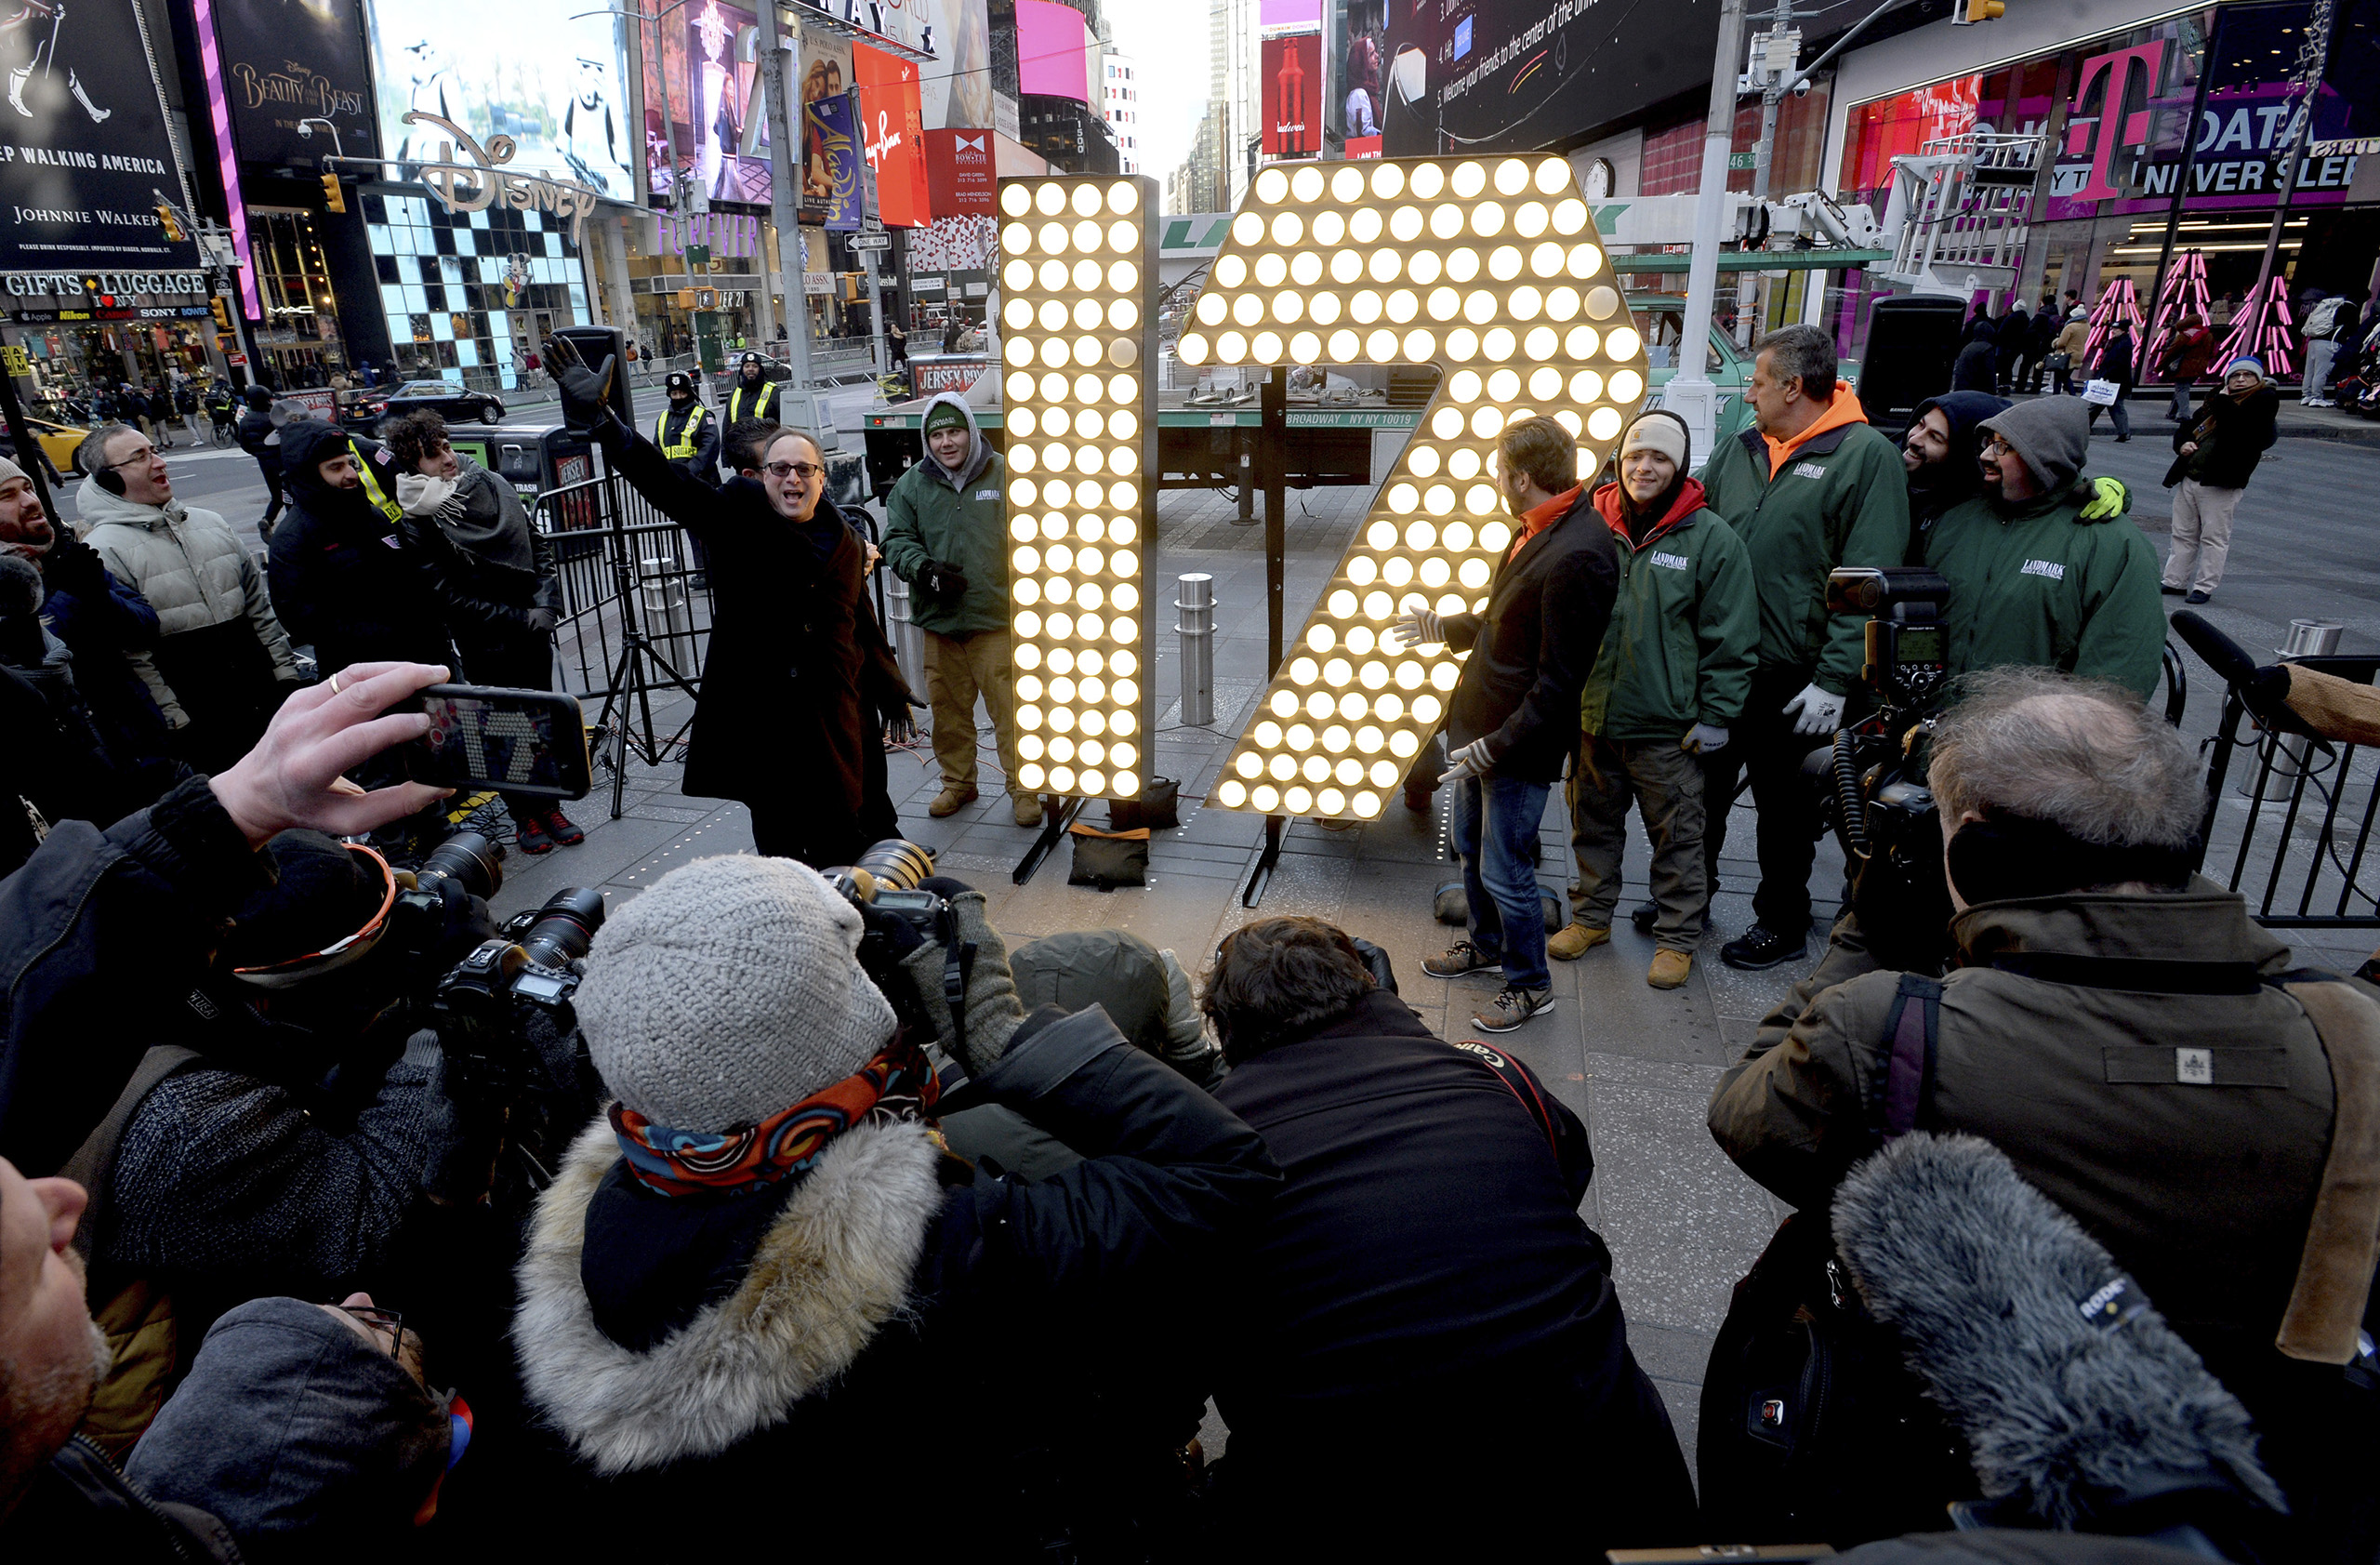 The numerals '1' and '7,' to be used to spell out '2-0-1-7' for the Times Square New Years Eve celebration, are unloaded from a flatbed truck before being unveiled in Times Square in New York City, on Dec. 15, 2016. (Dennis Van Tine—Sipa USA/AP)